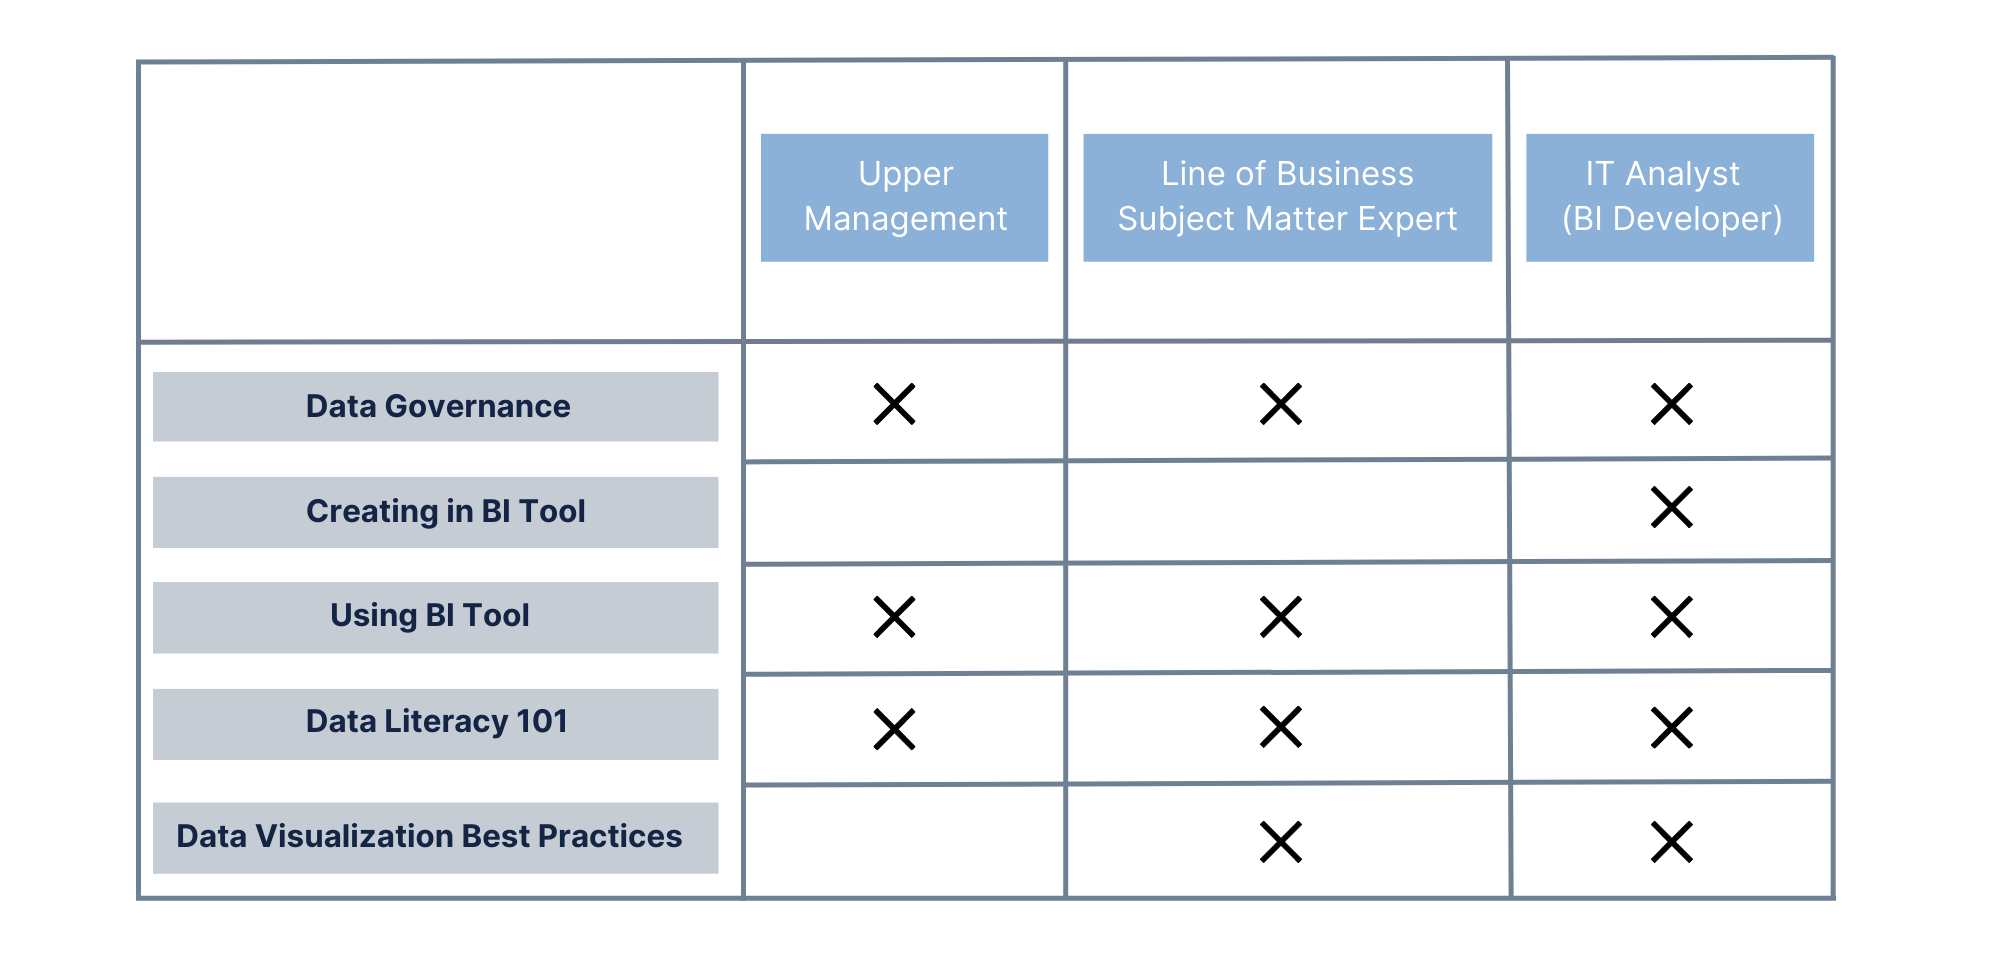 4x6 box representing skills gaps in your data analytics team. First row states: Upper Management, Line of Business Subject Matter Expert, IT Analyst. Rows 2-6 are marked with X symbols aligned to different data and analytics practices/responsibilities on the left.